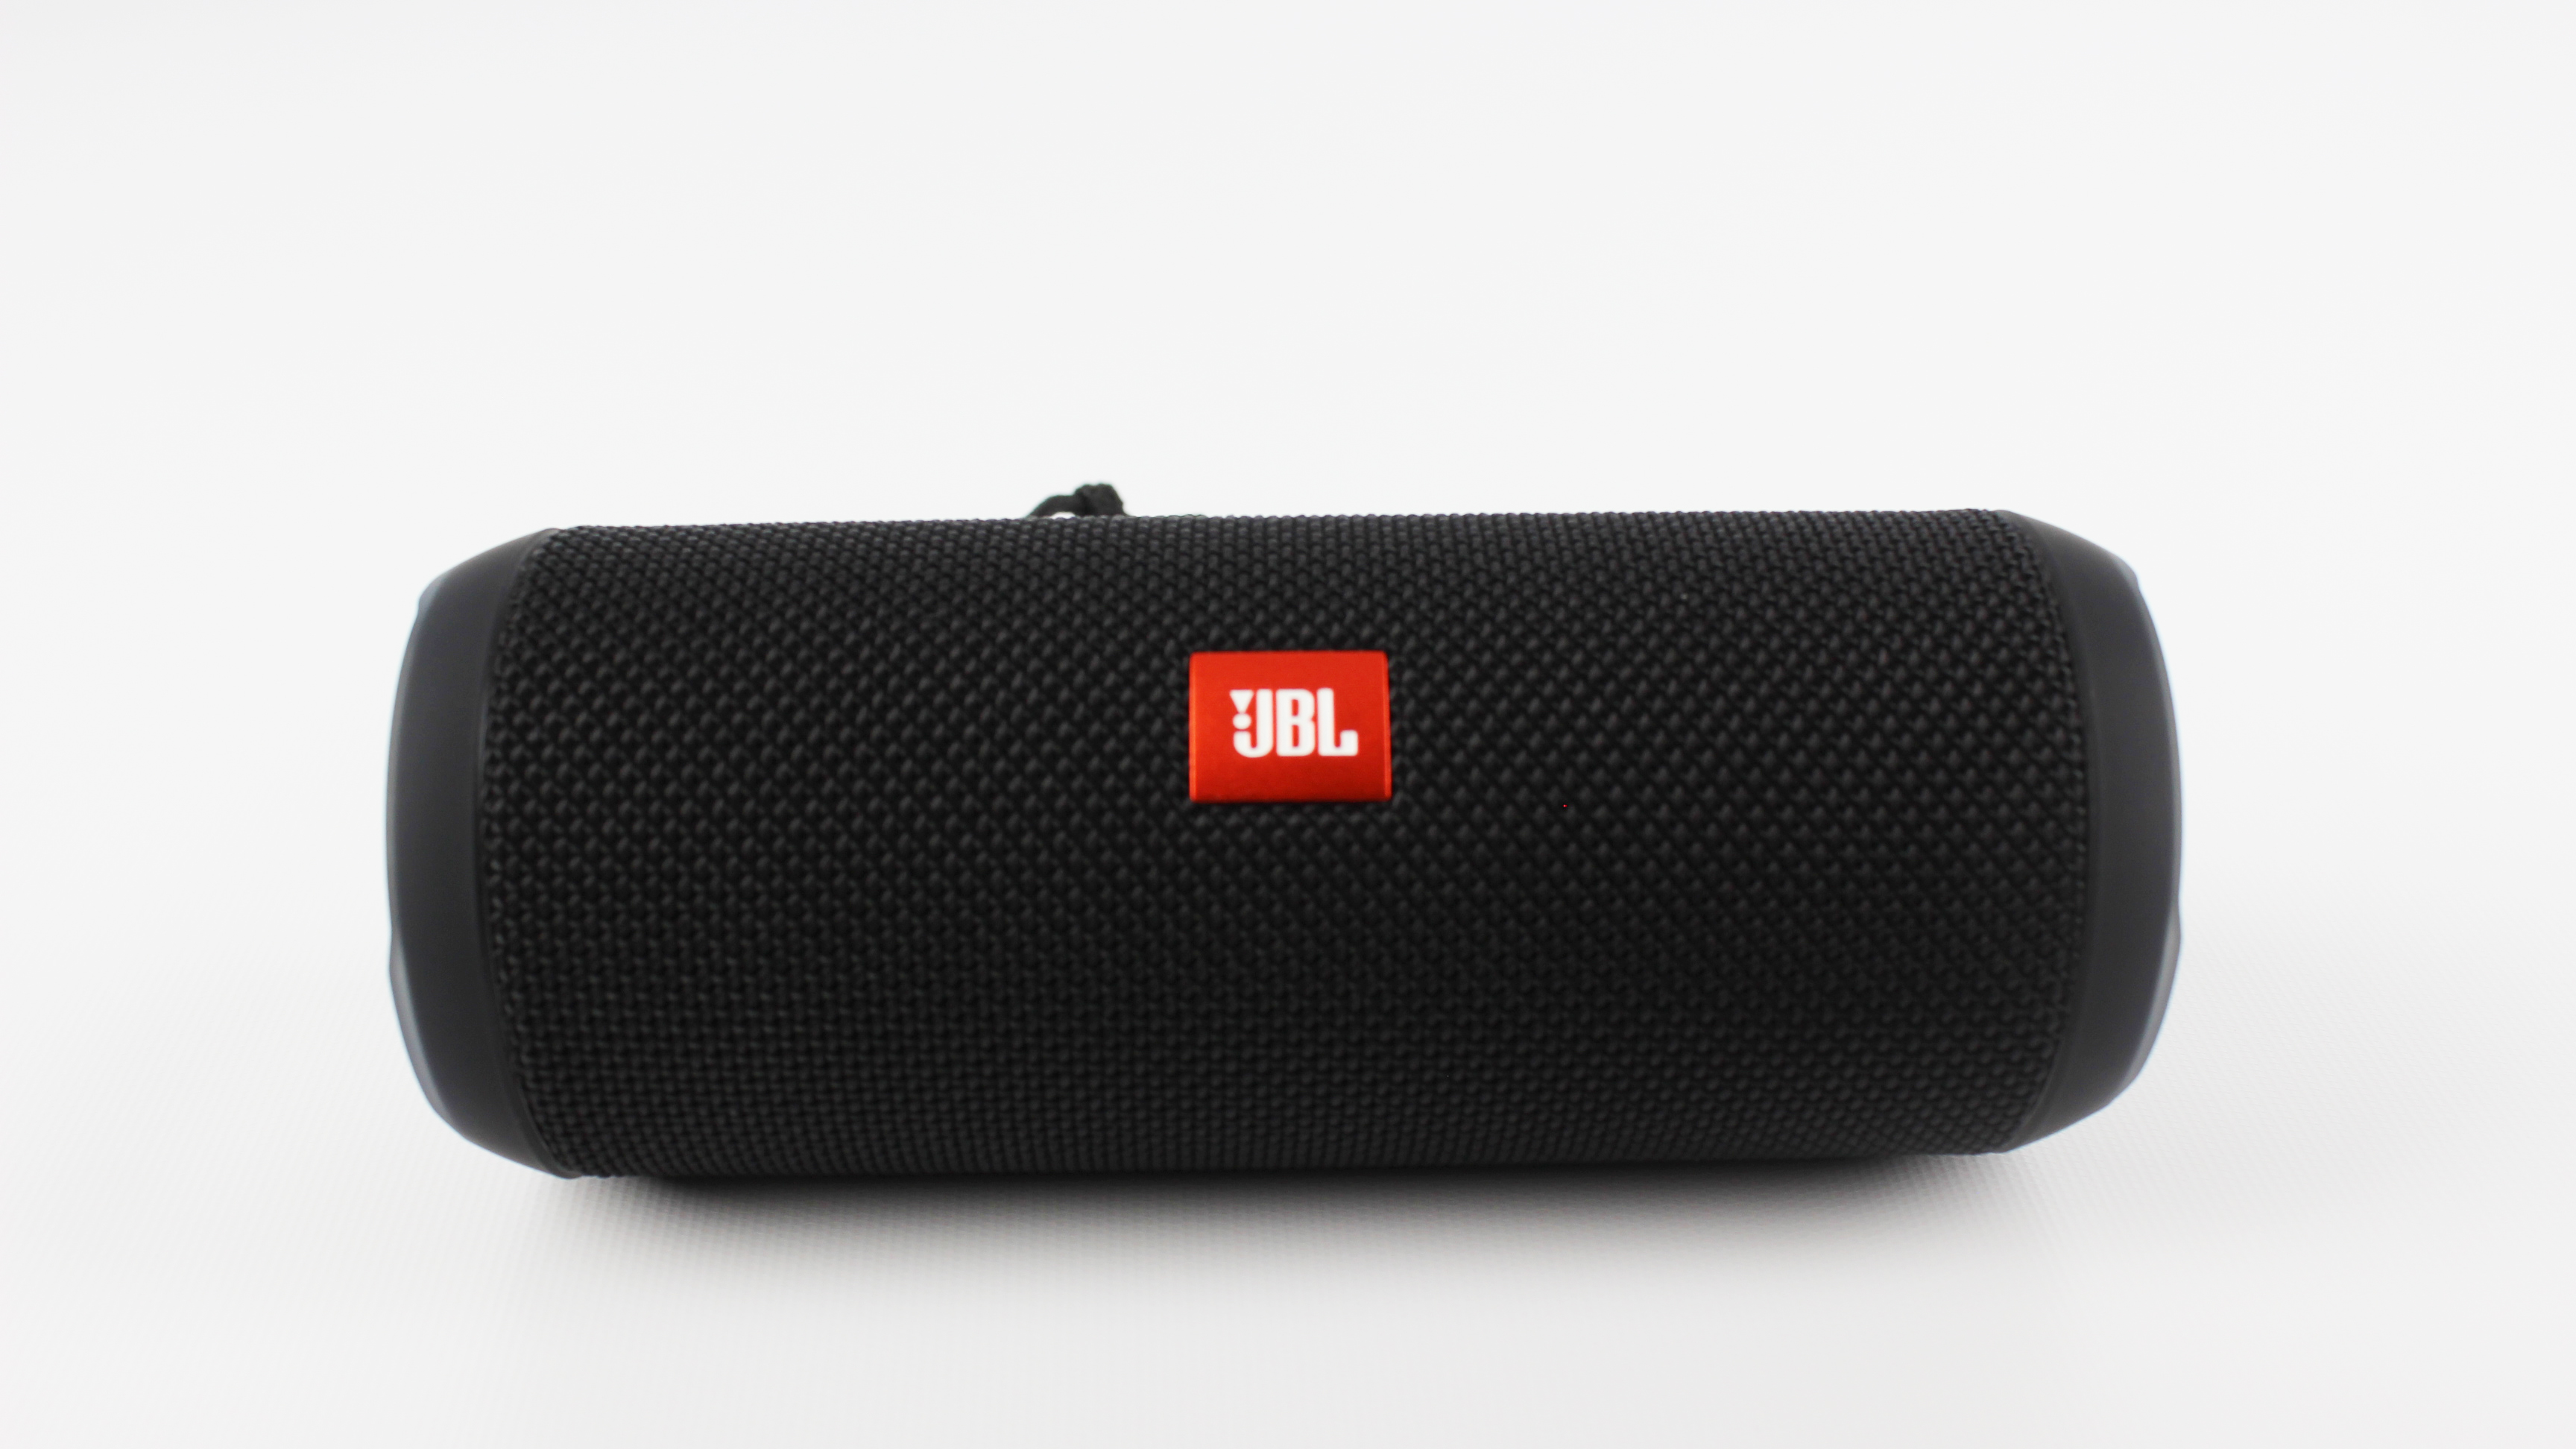 Shot of the JBL logo on the front of the Flip 3. 